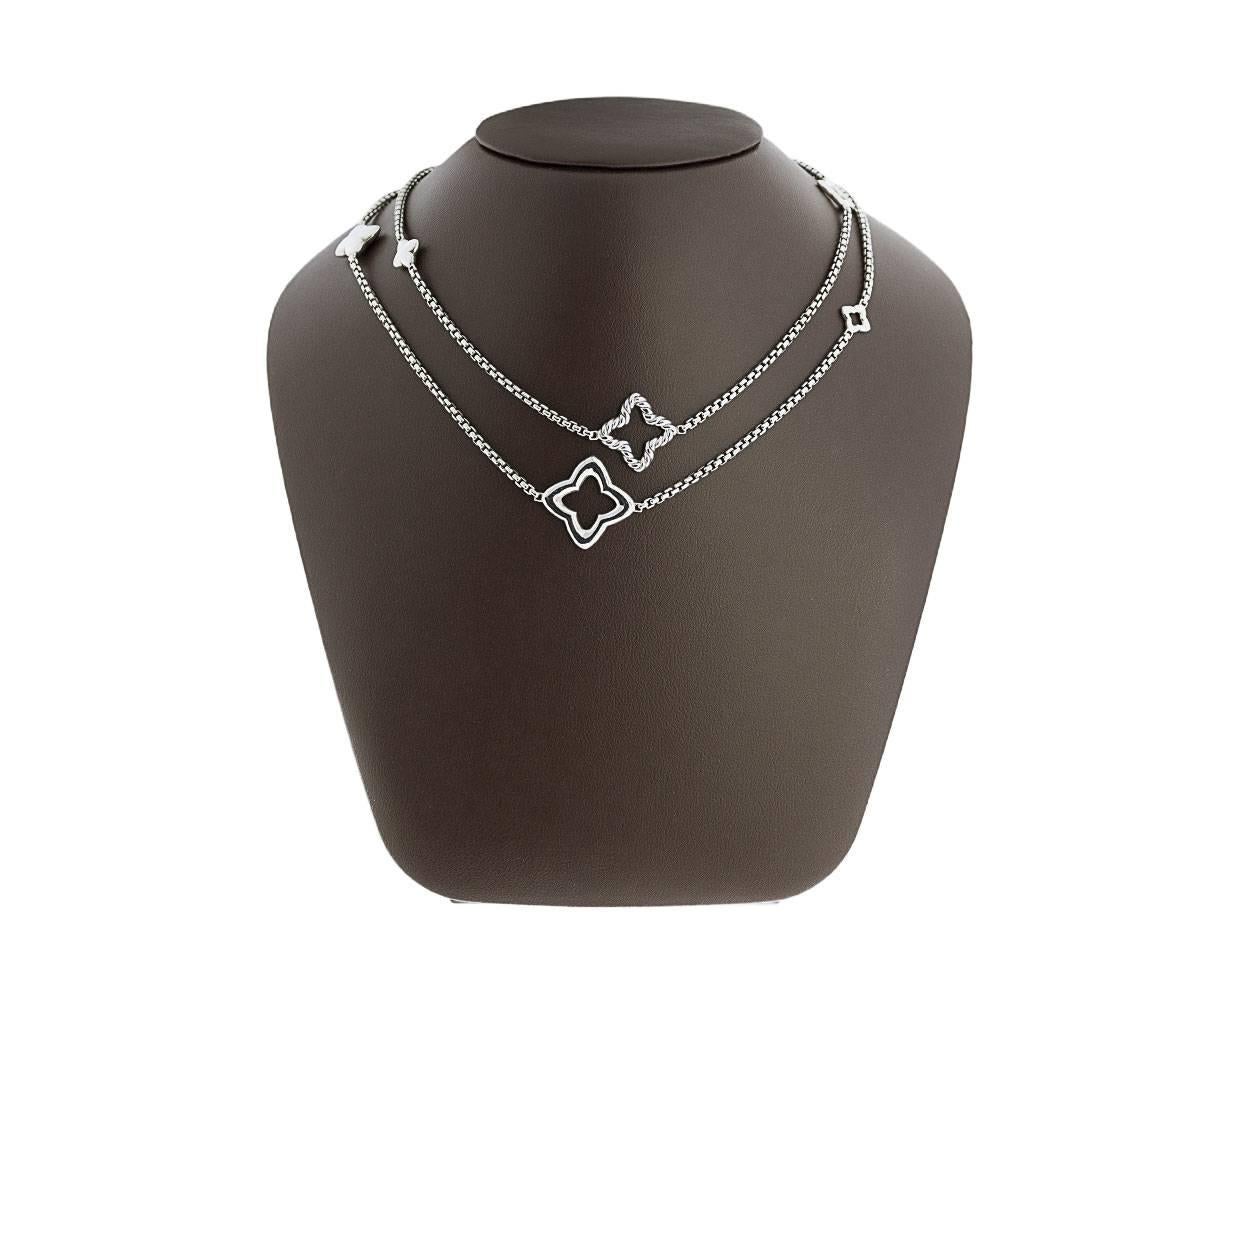 This beautiful chain necklace features Yurman's signature cable design and quatrefoil pendants. This necklace is made of sterling silver and is 36